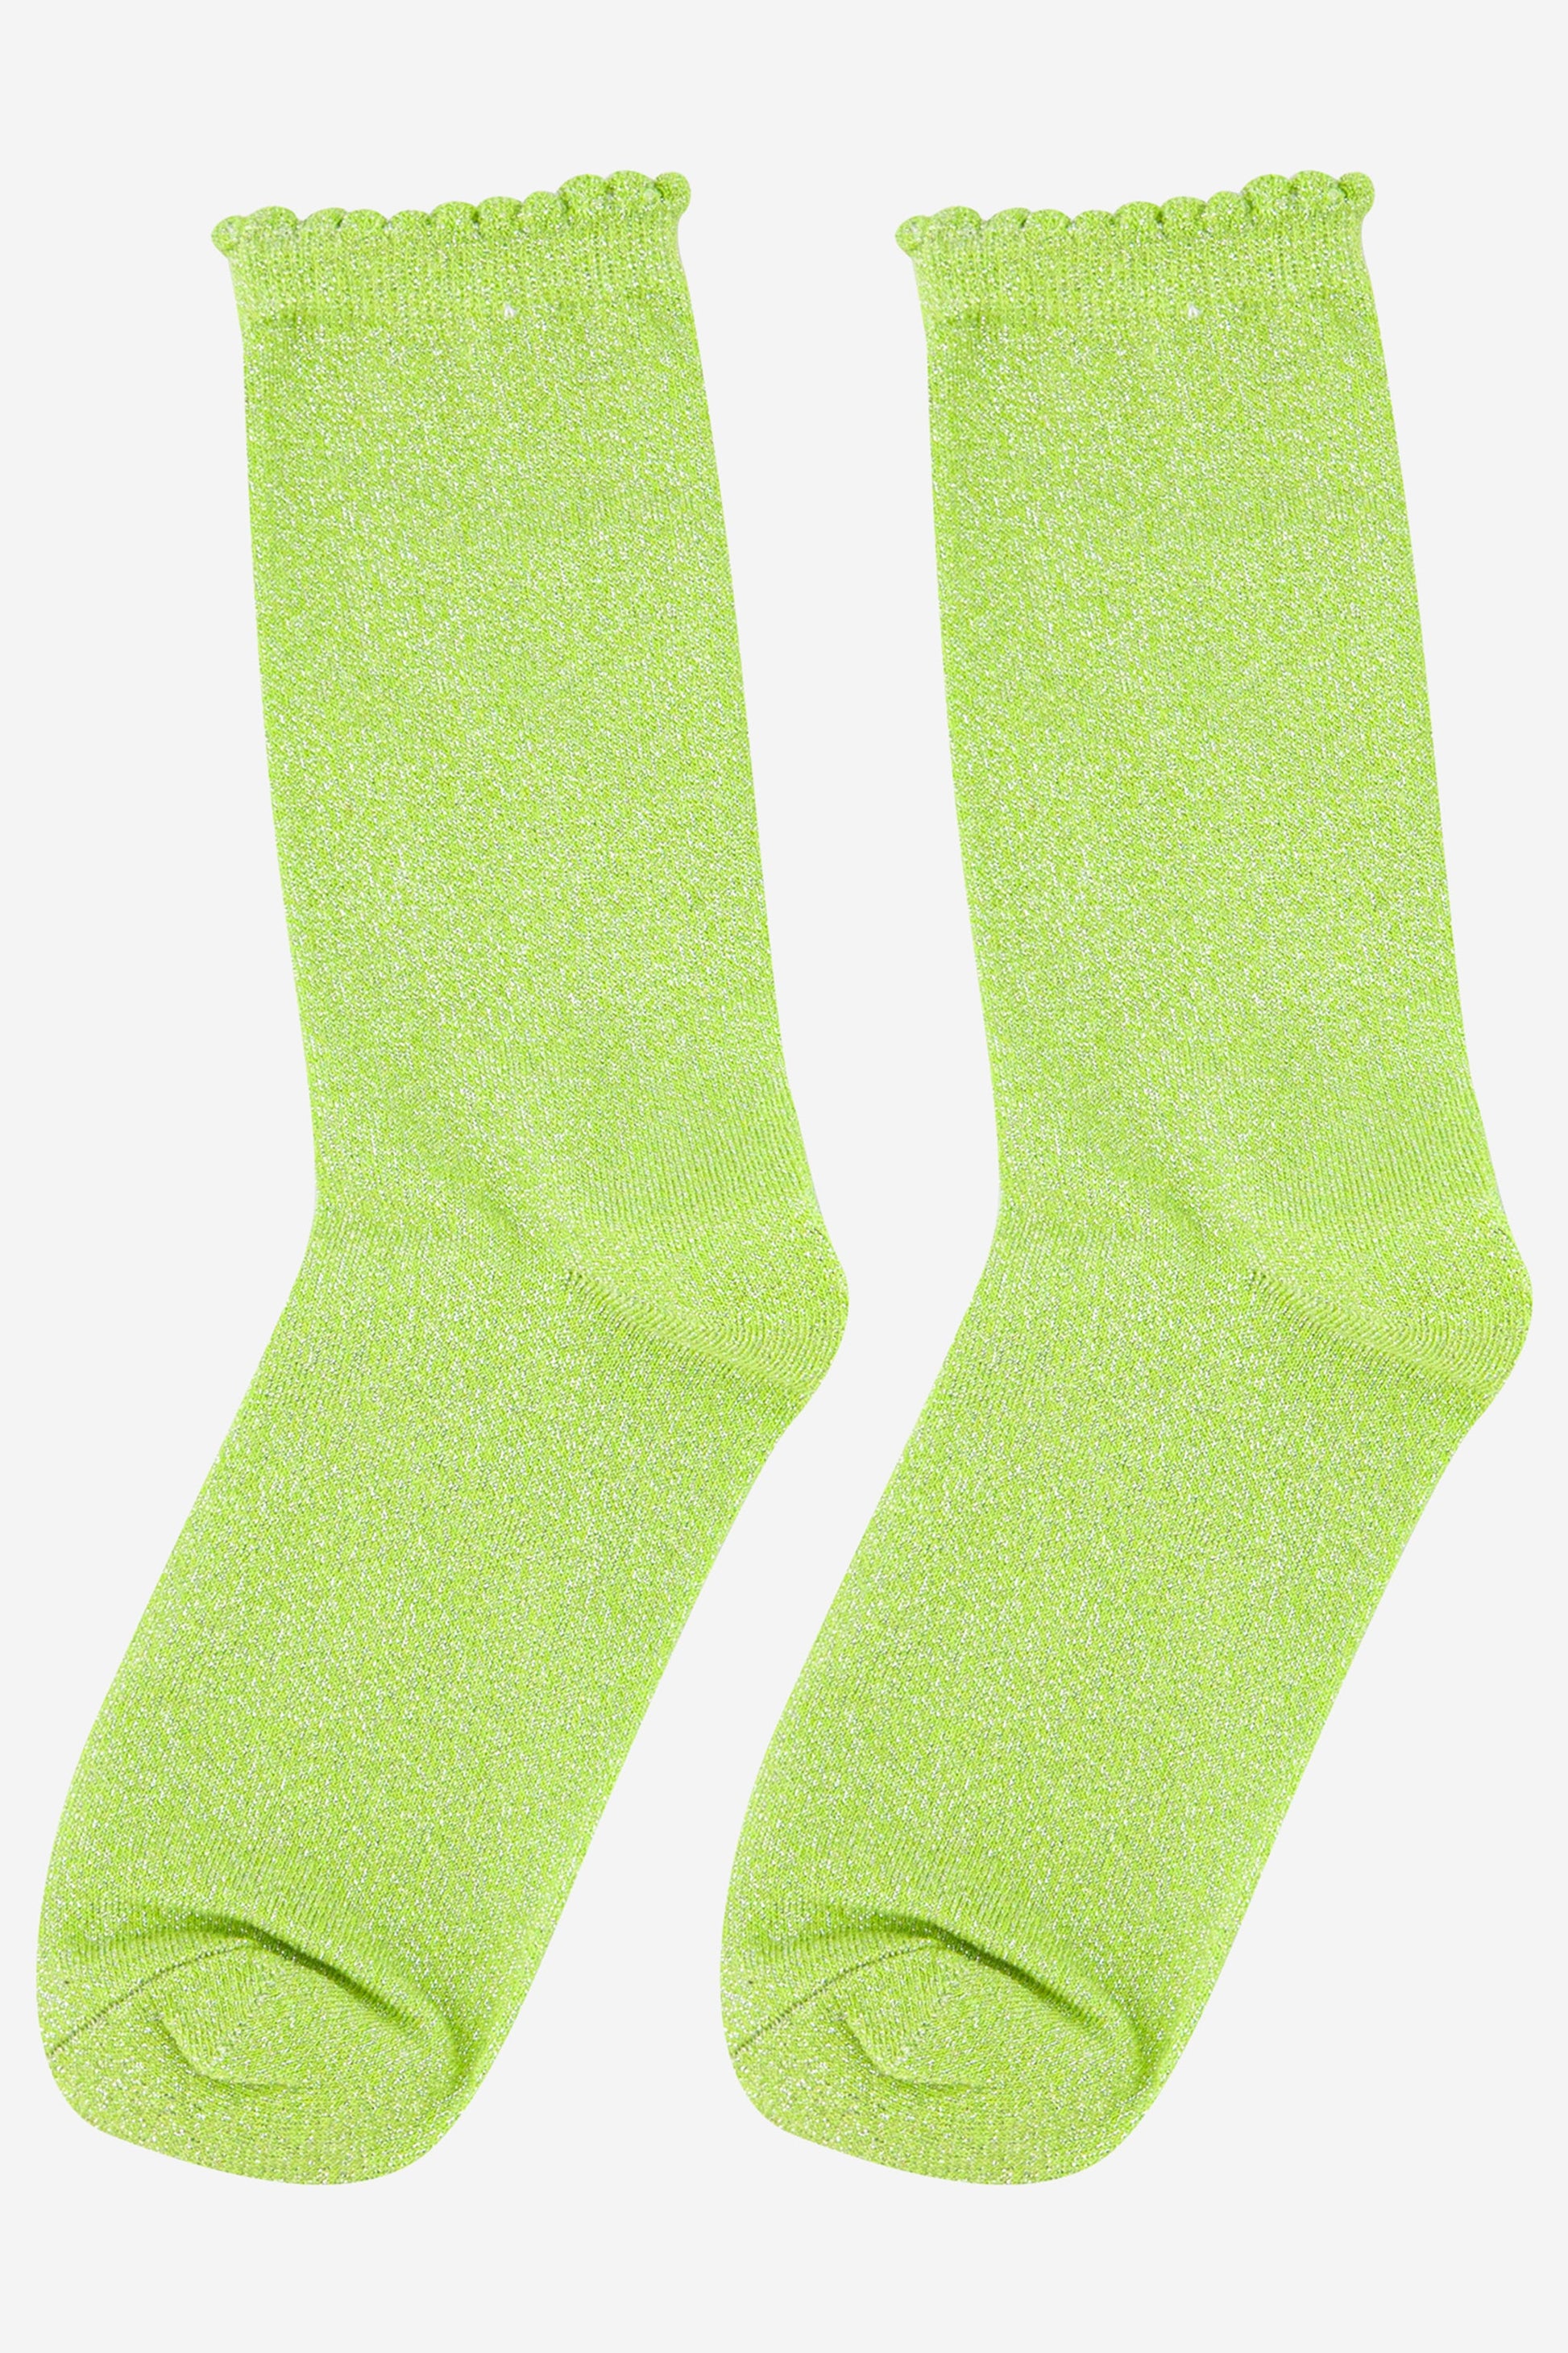 lime green sparkly glitter socks with scalloped cuffs and an all over shimmer